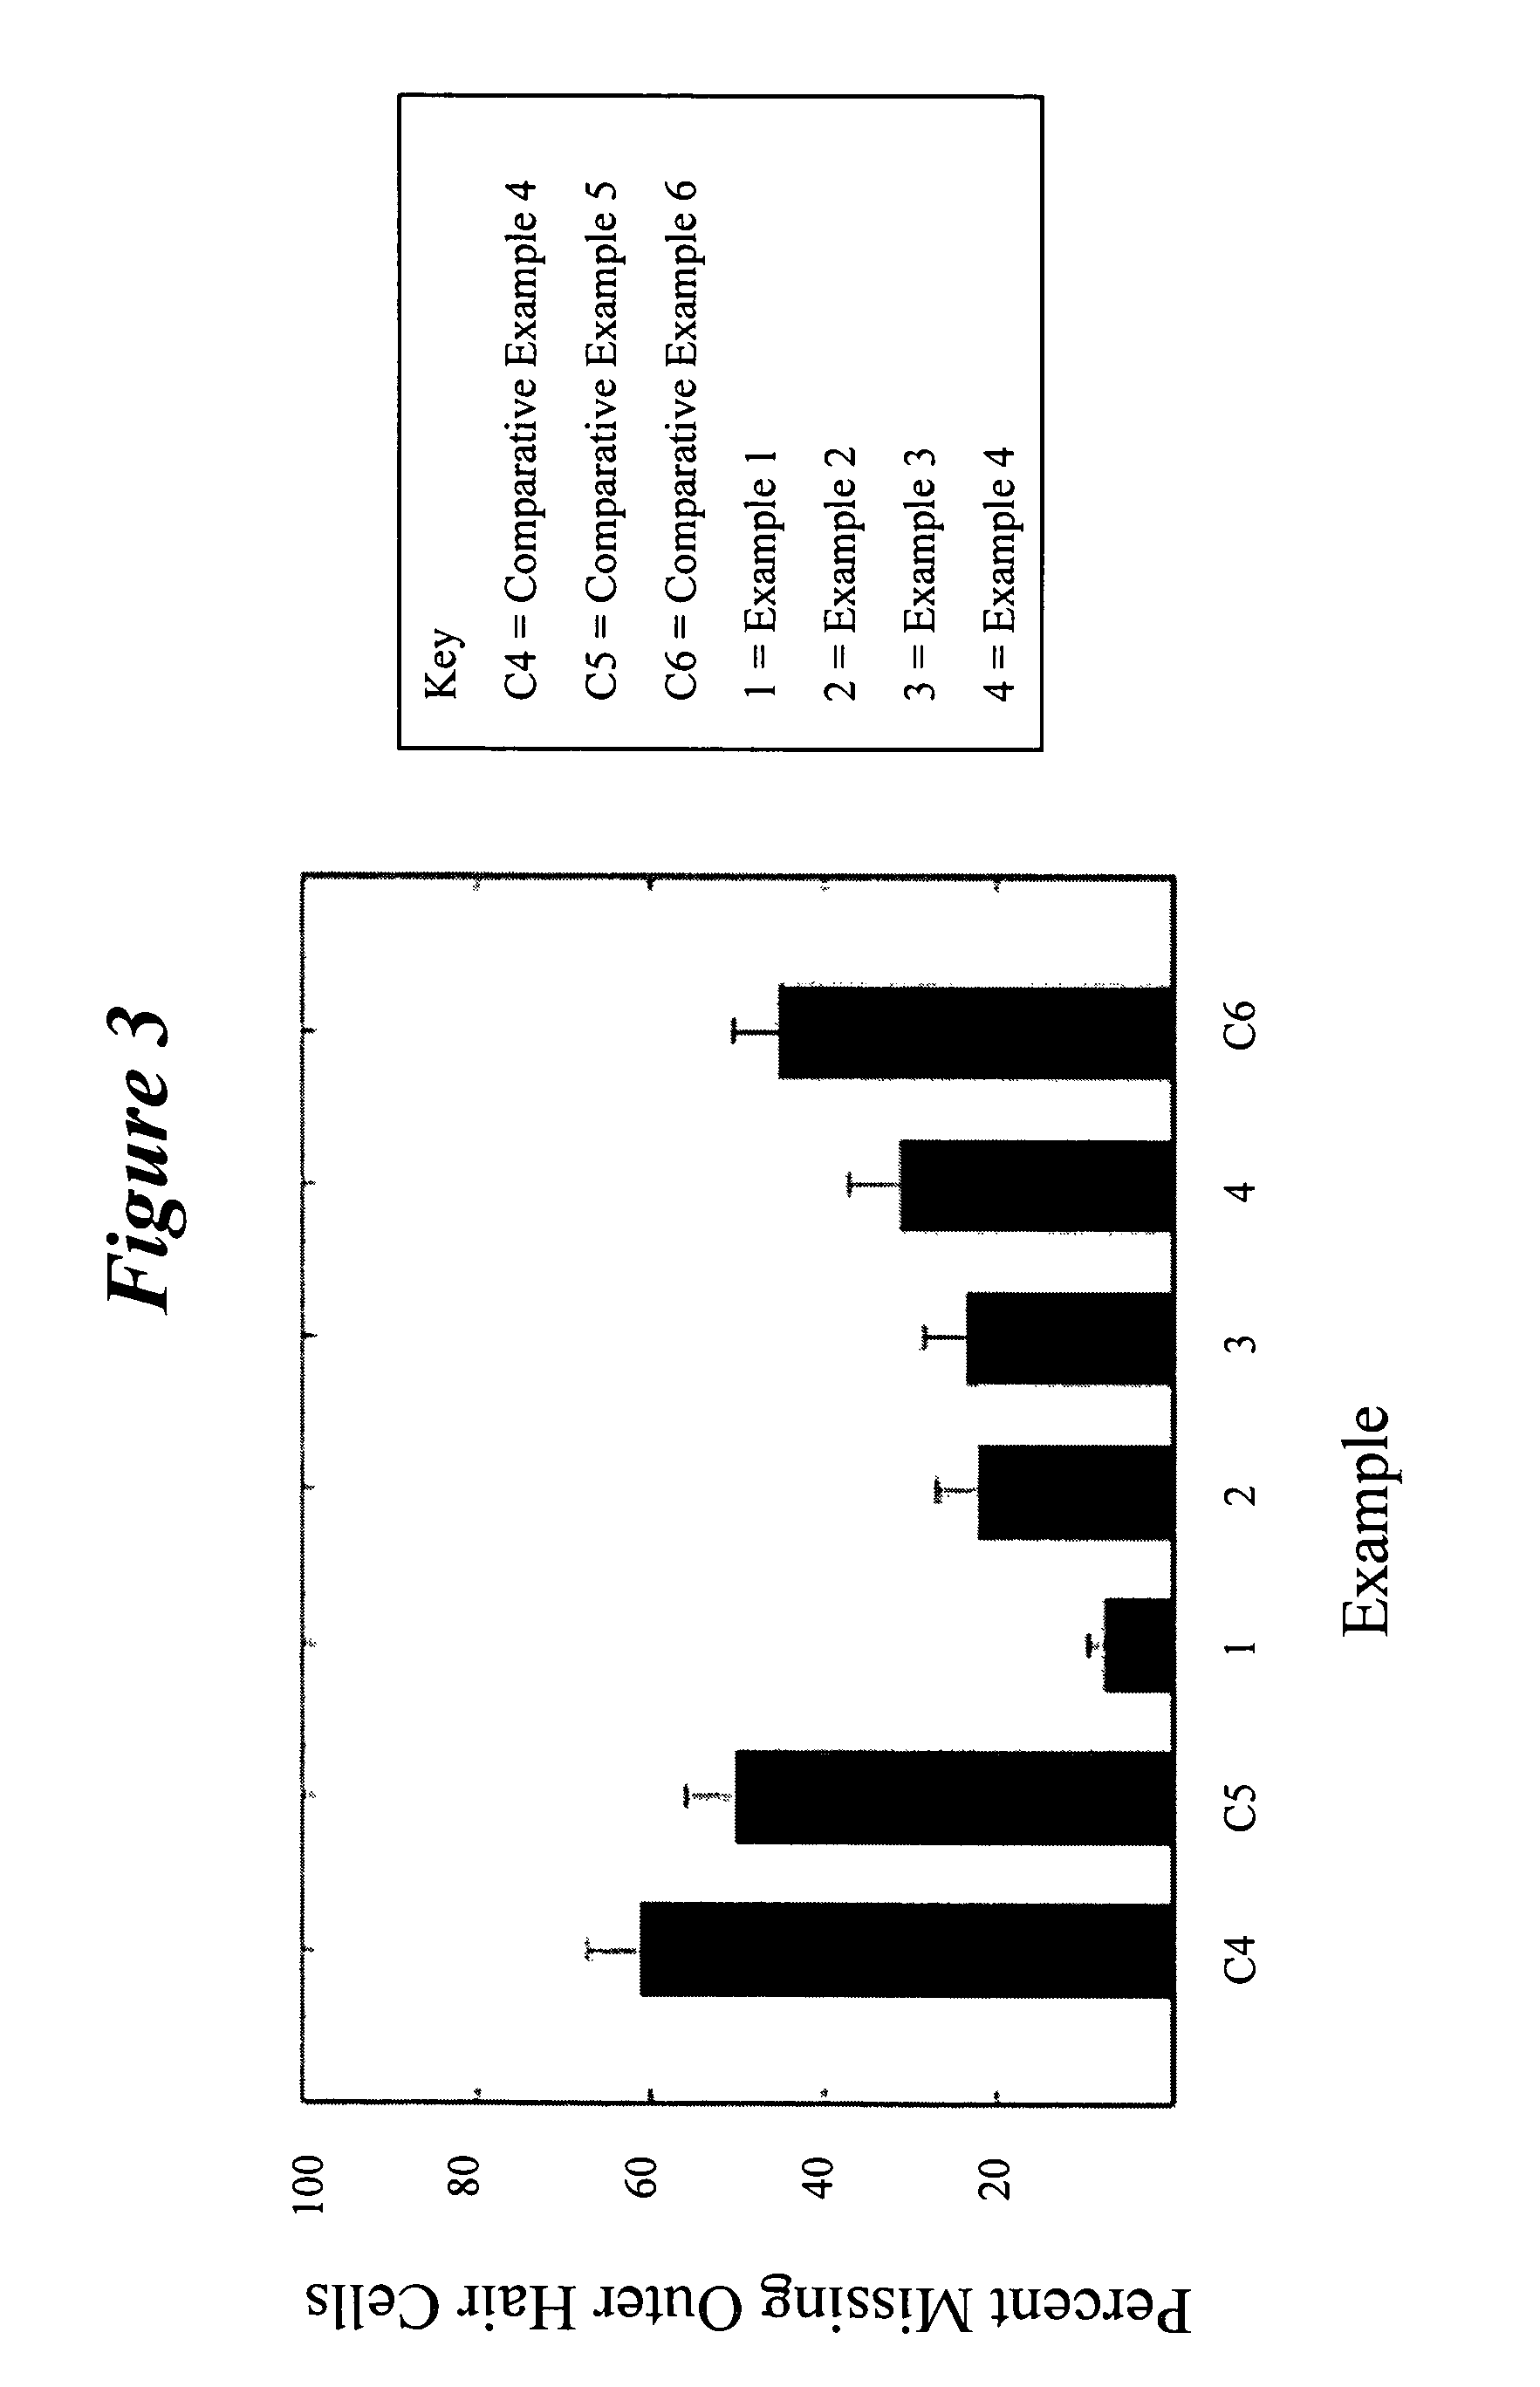 Composition and method of treating hearing loss